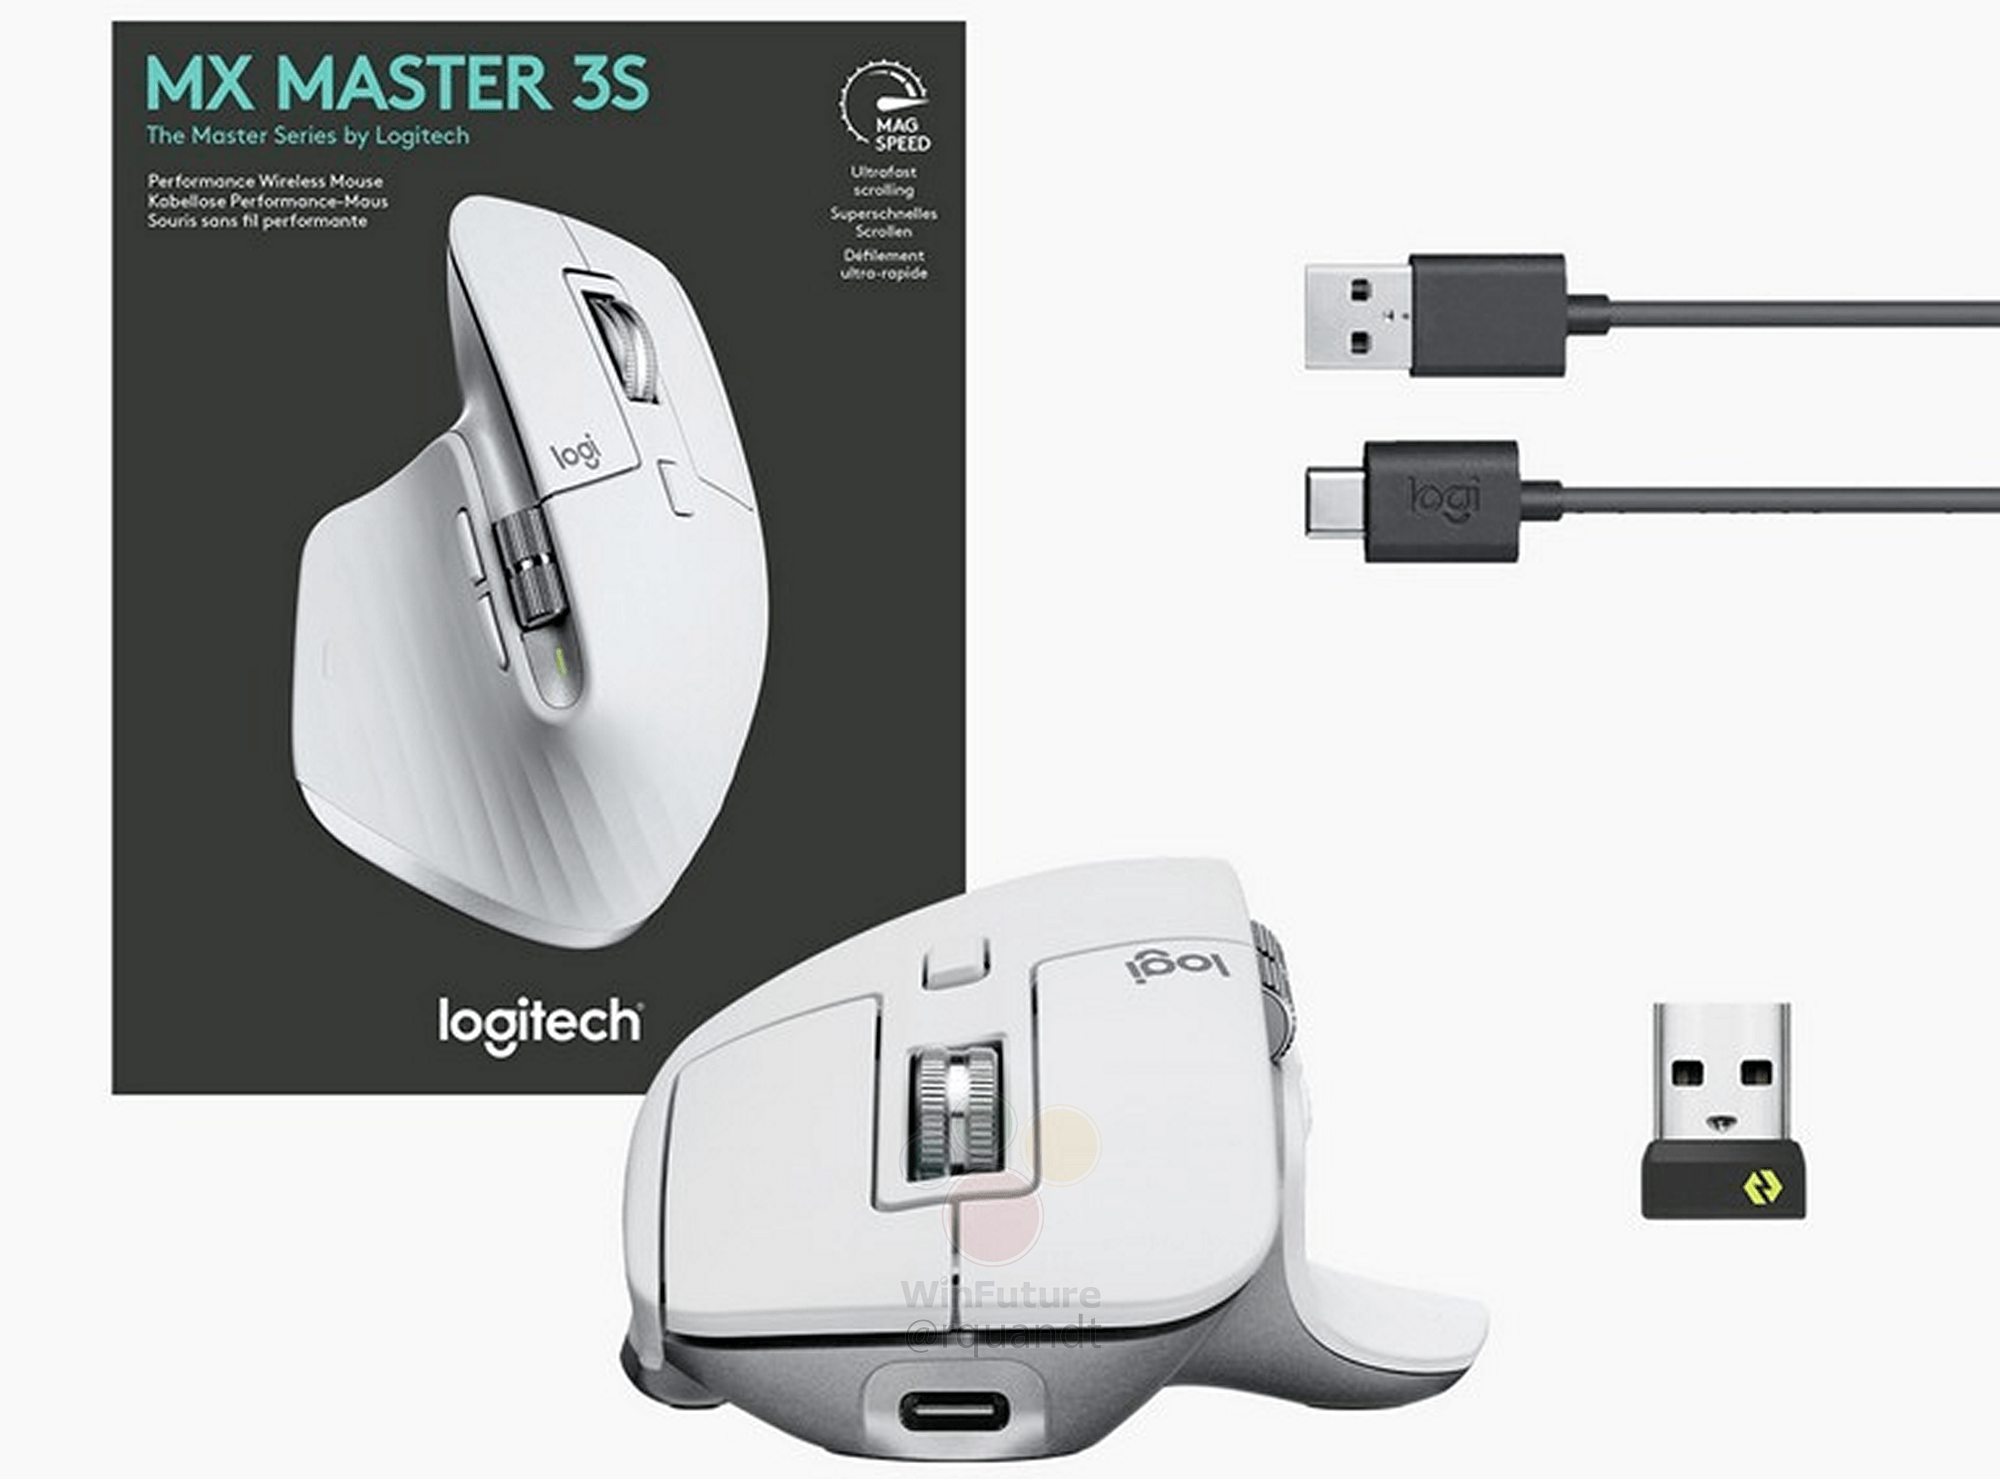 Logitech MX Master 3S: Upcoming mouse with important changes and an increased asking - NotebookCheck.net News